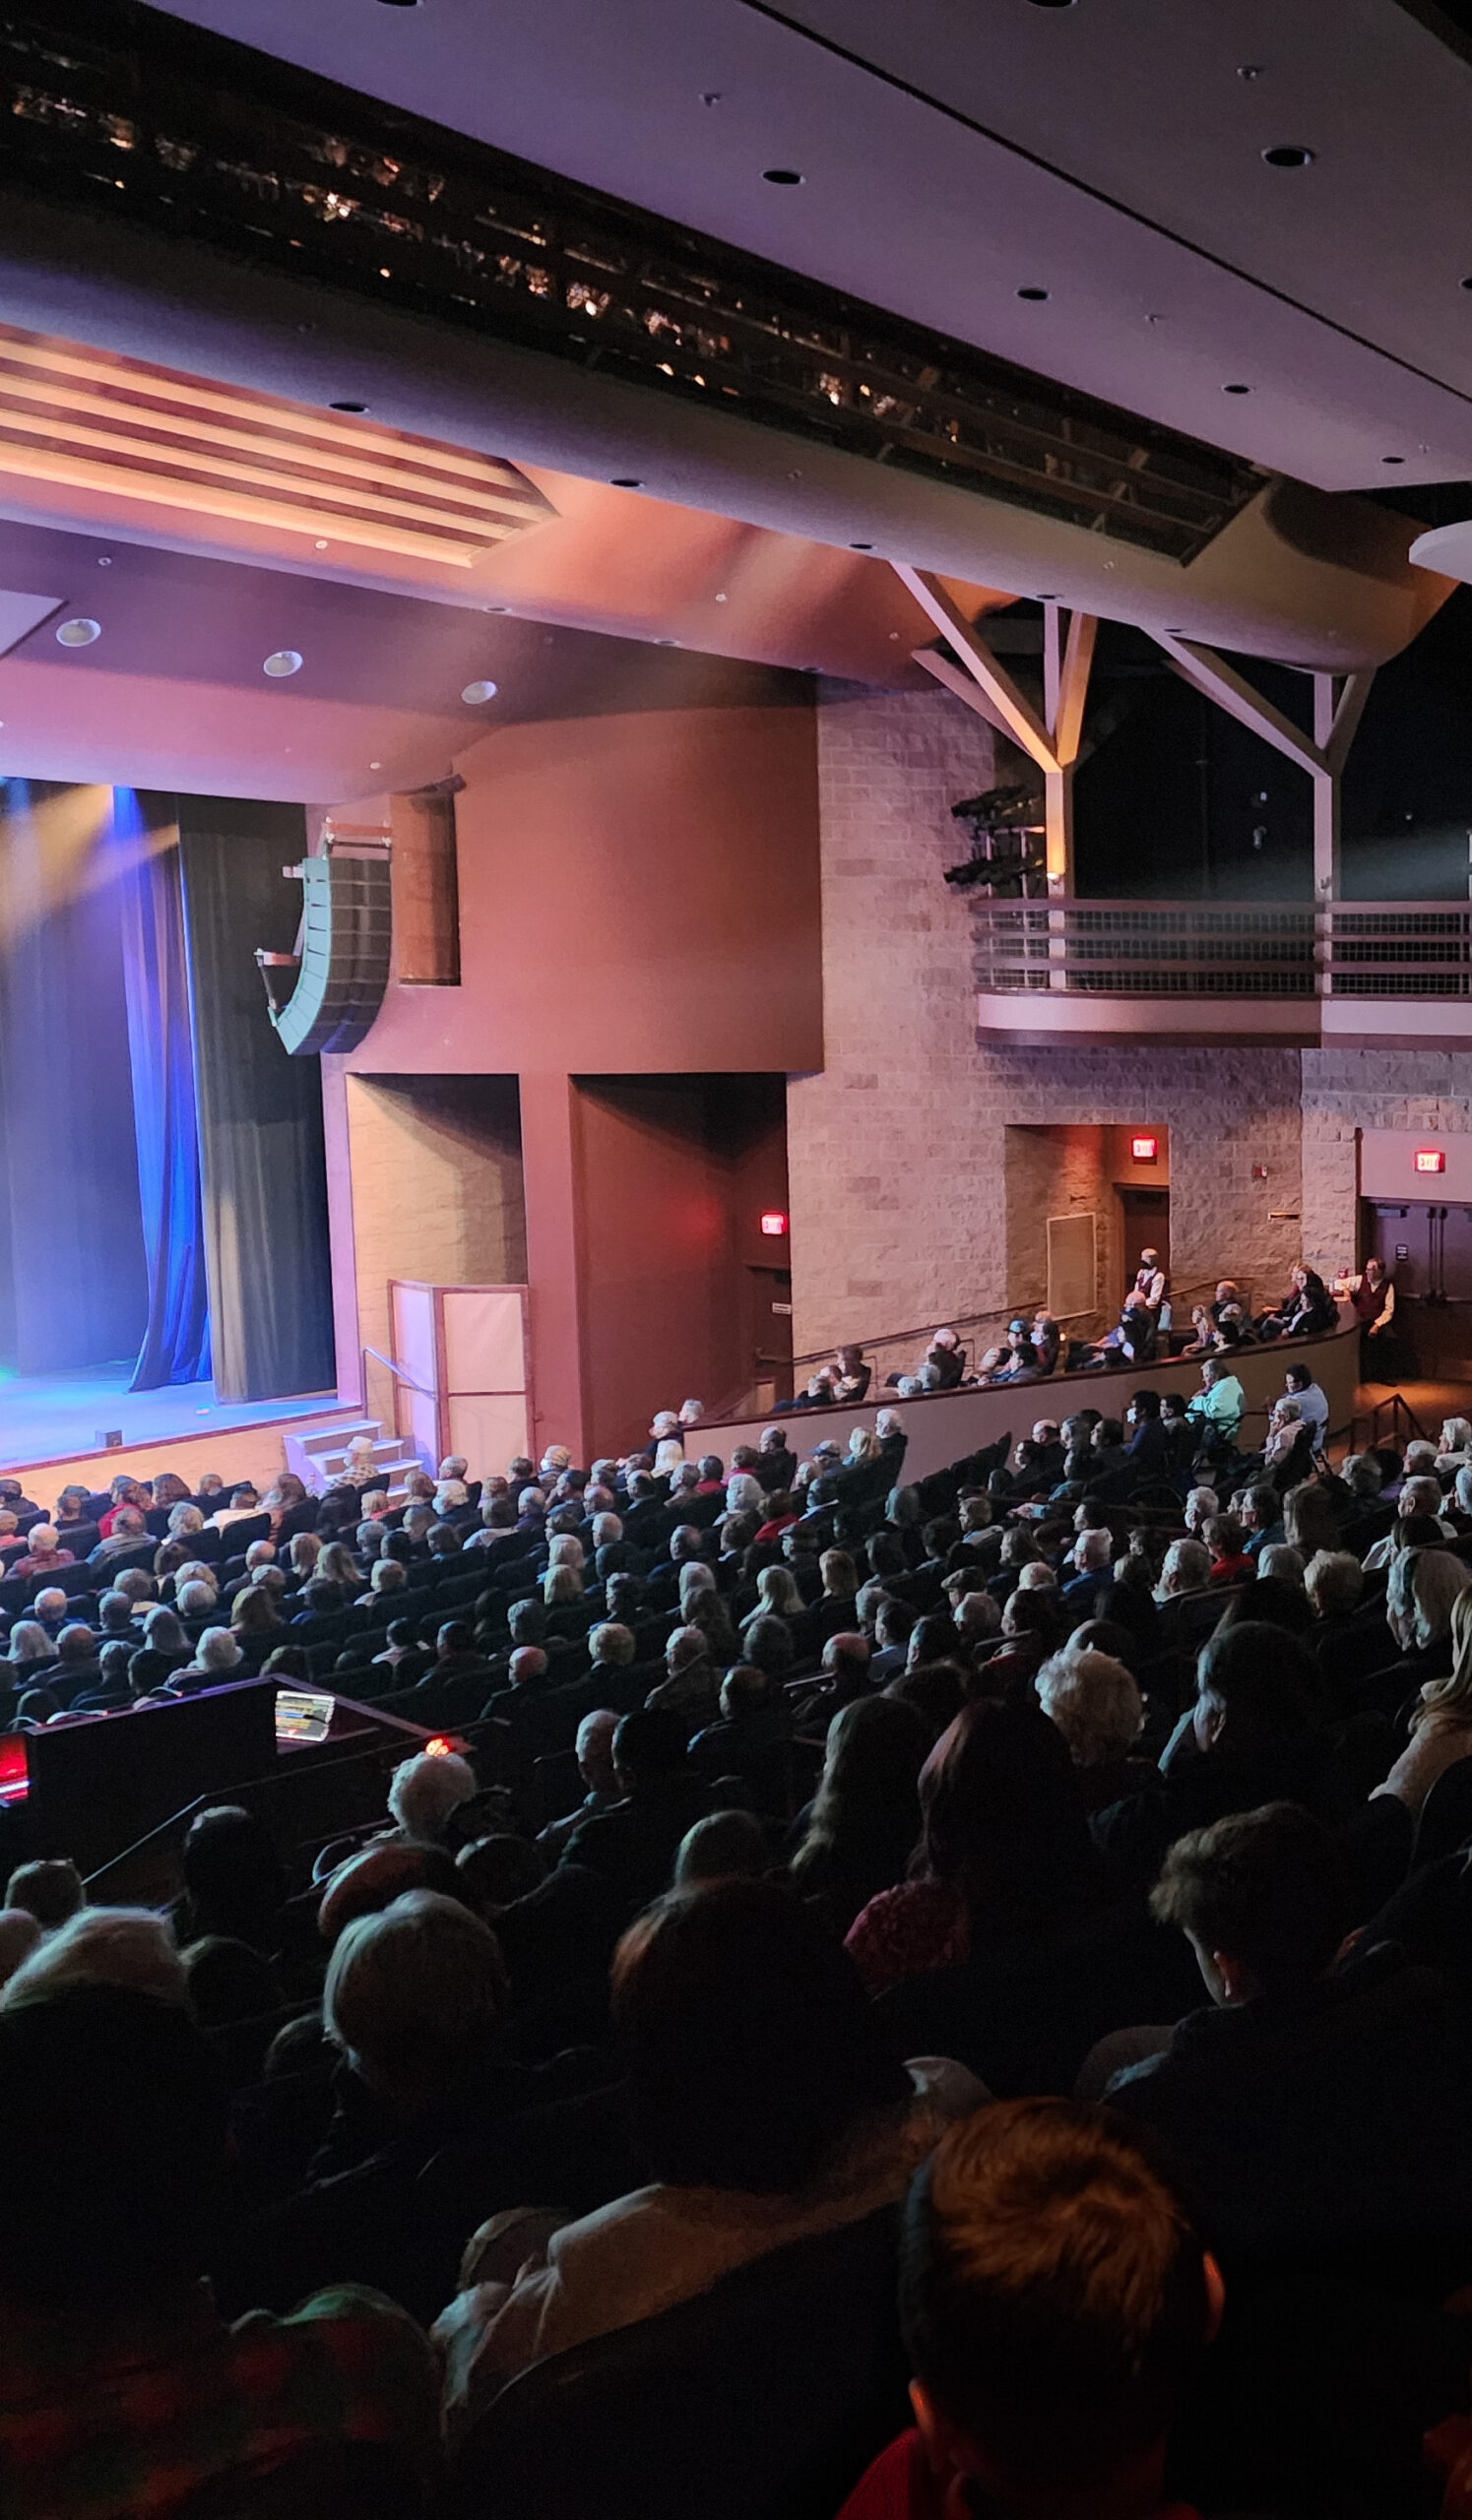 A full house in front of the Clark Center stage.